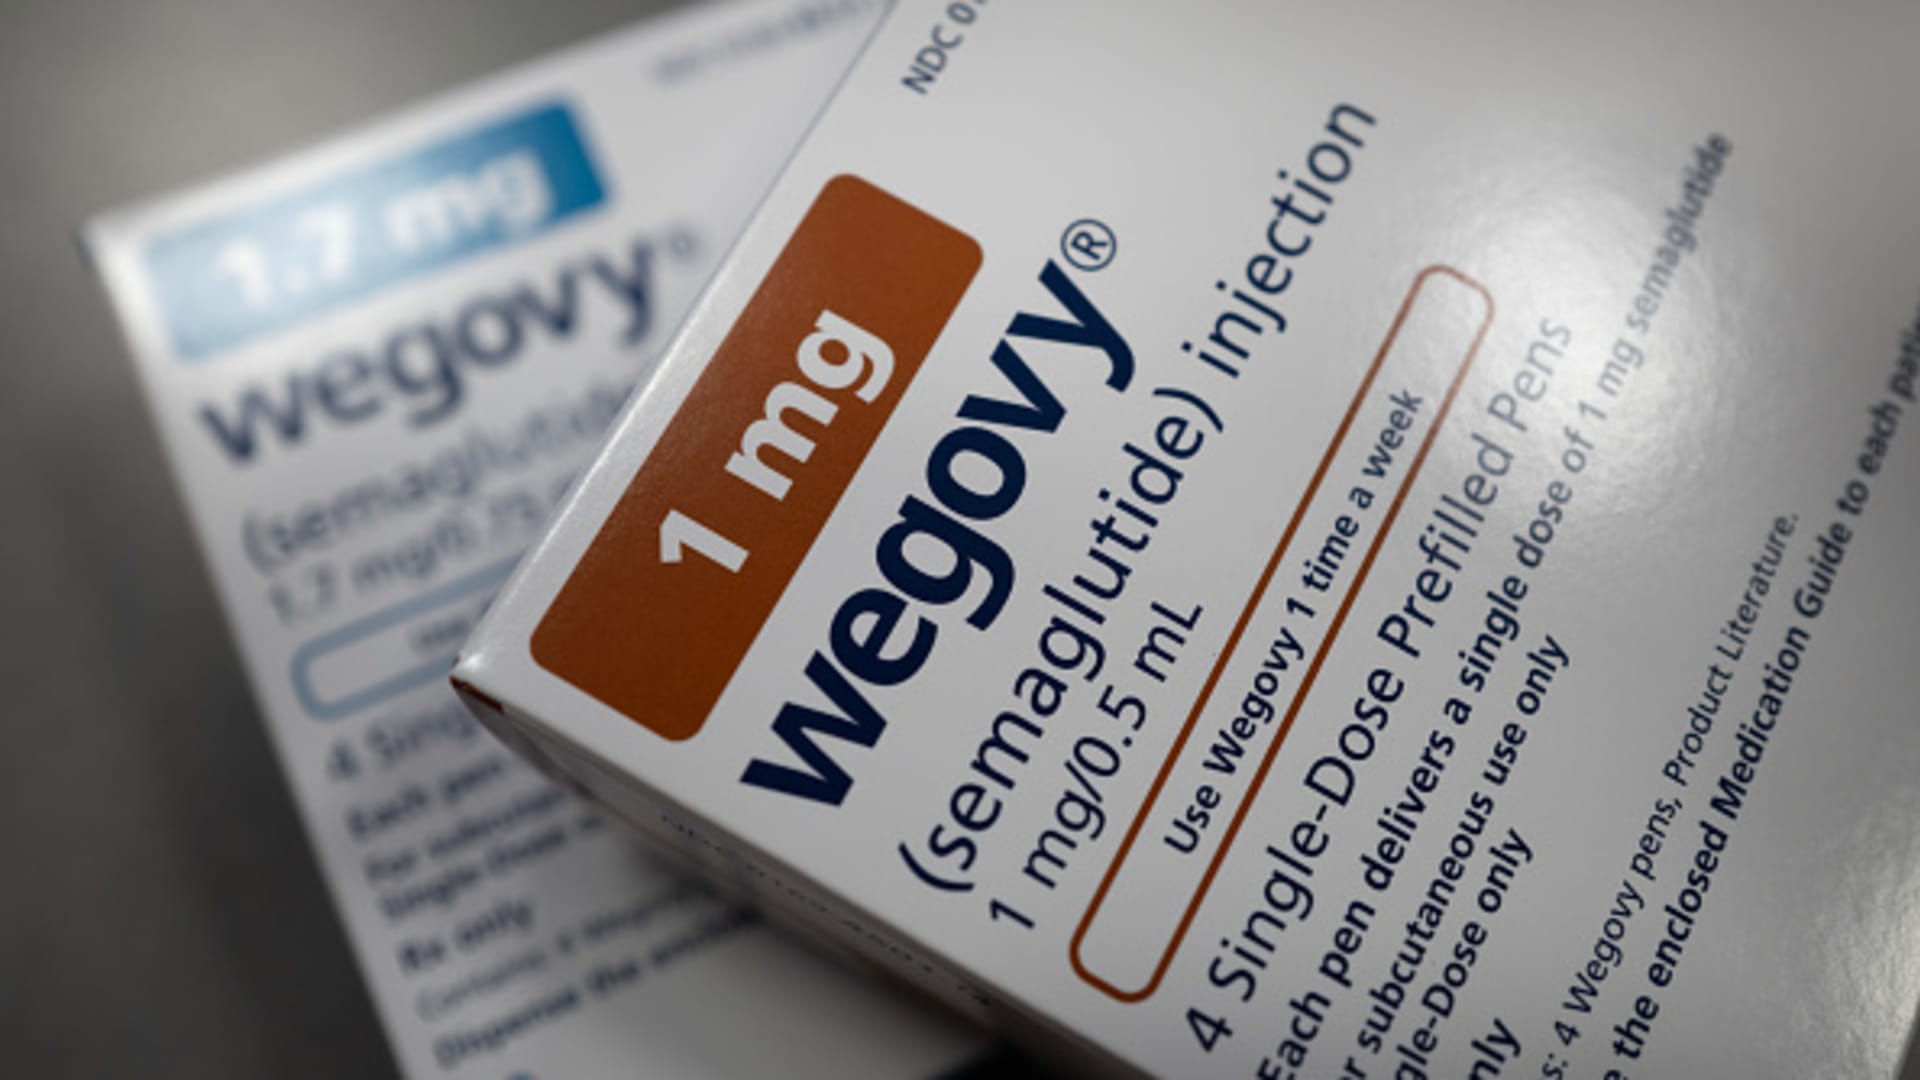 The injectable weight loss medication Wegovy is available at New City Halstead Pharmacy in Chicago, Illinois, on April 24, 2024.